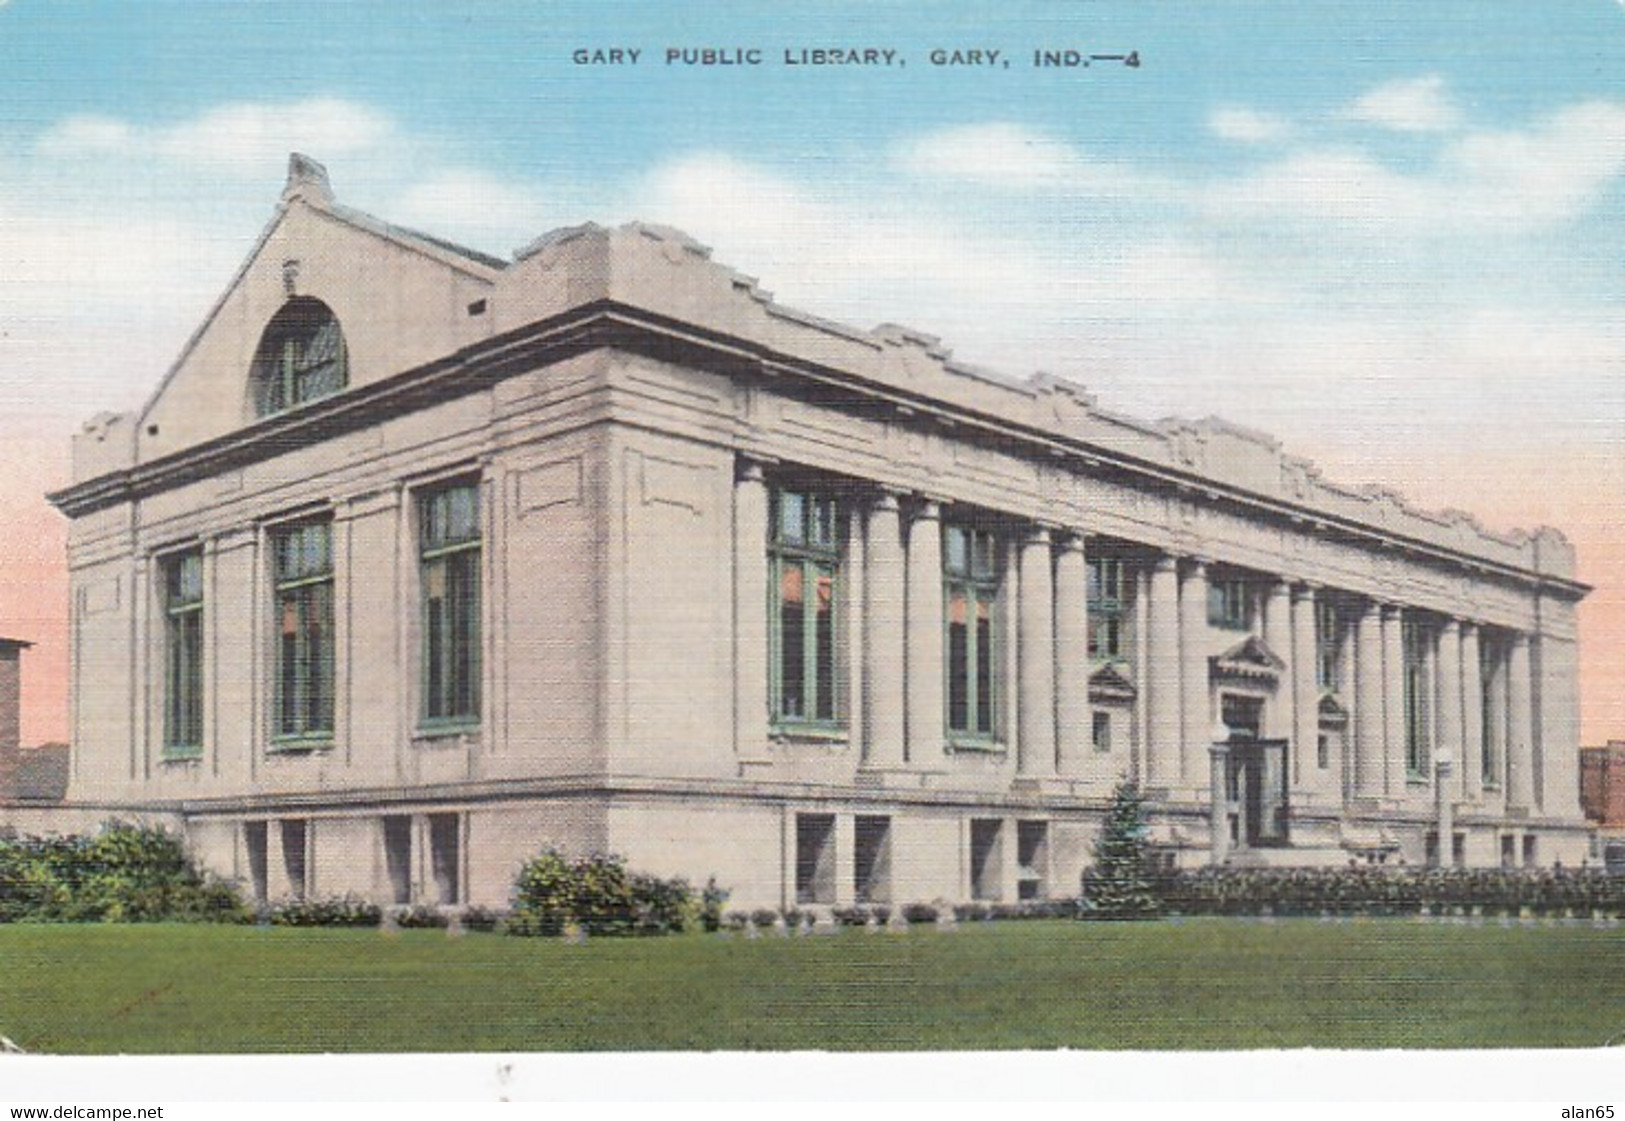 Gary Indiana, Gary Public Library Building Architecture, C1930s Vintage Postcard - Bibliothèques